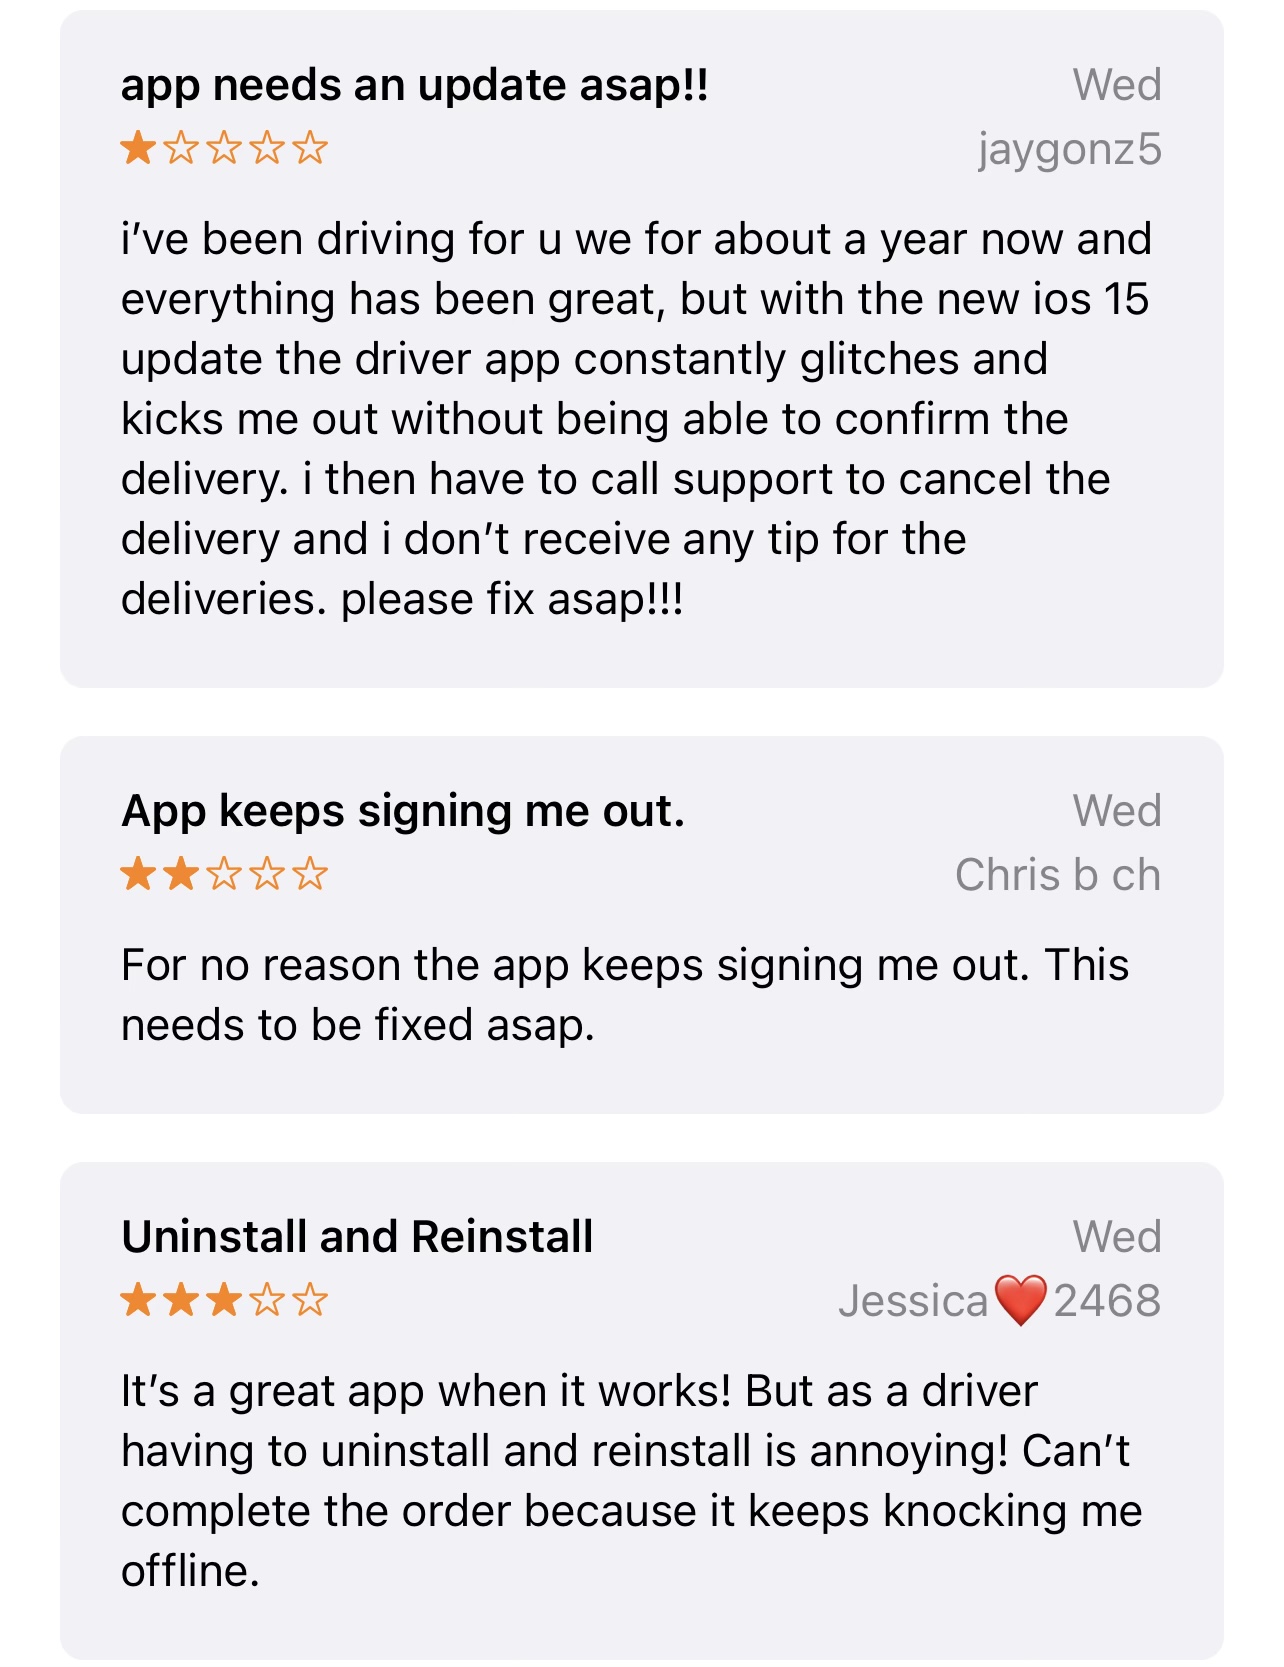 So many drivers trying to report the same issue